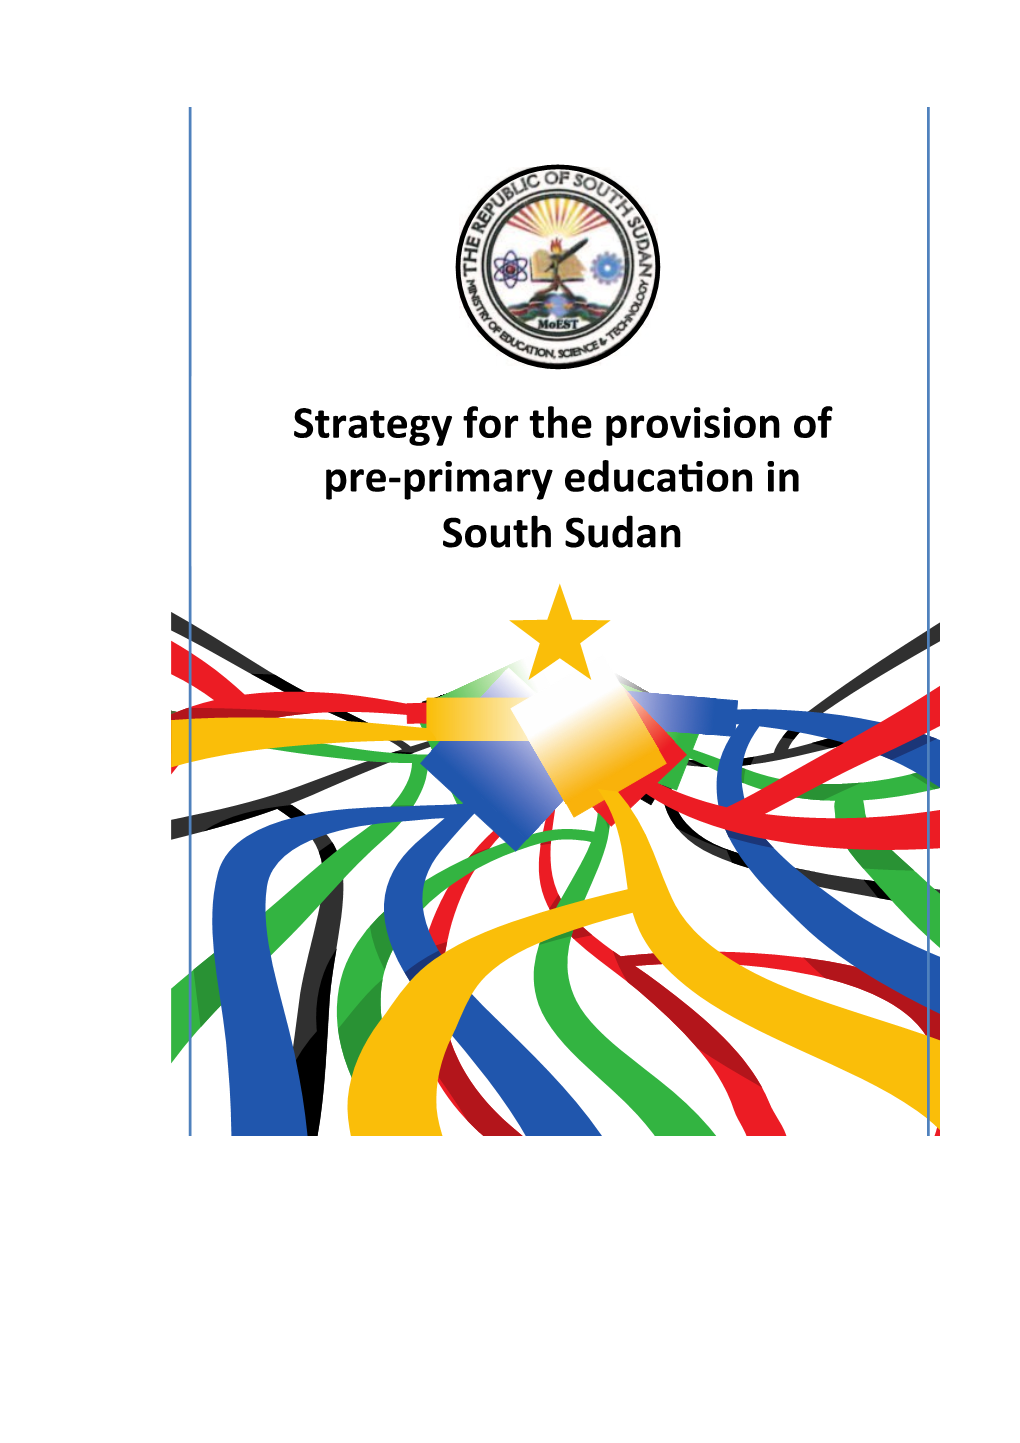 The South Sudan Approach to Early Childhood Development